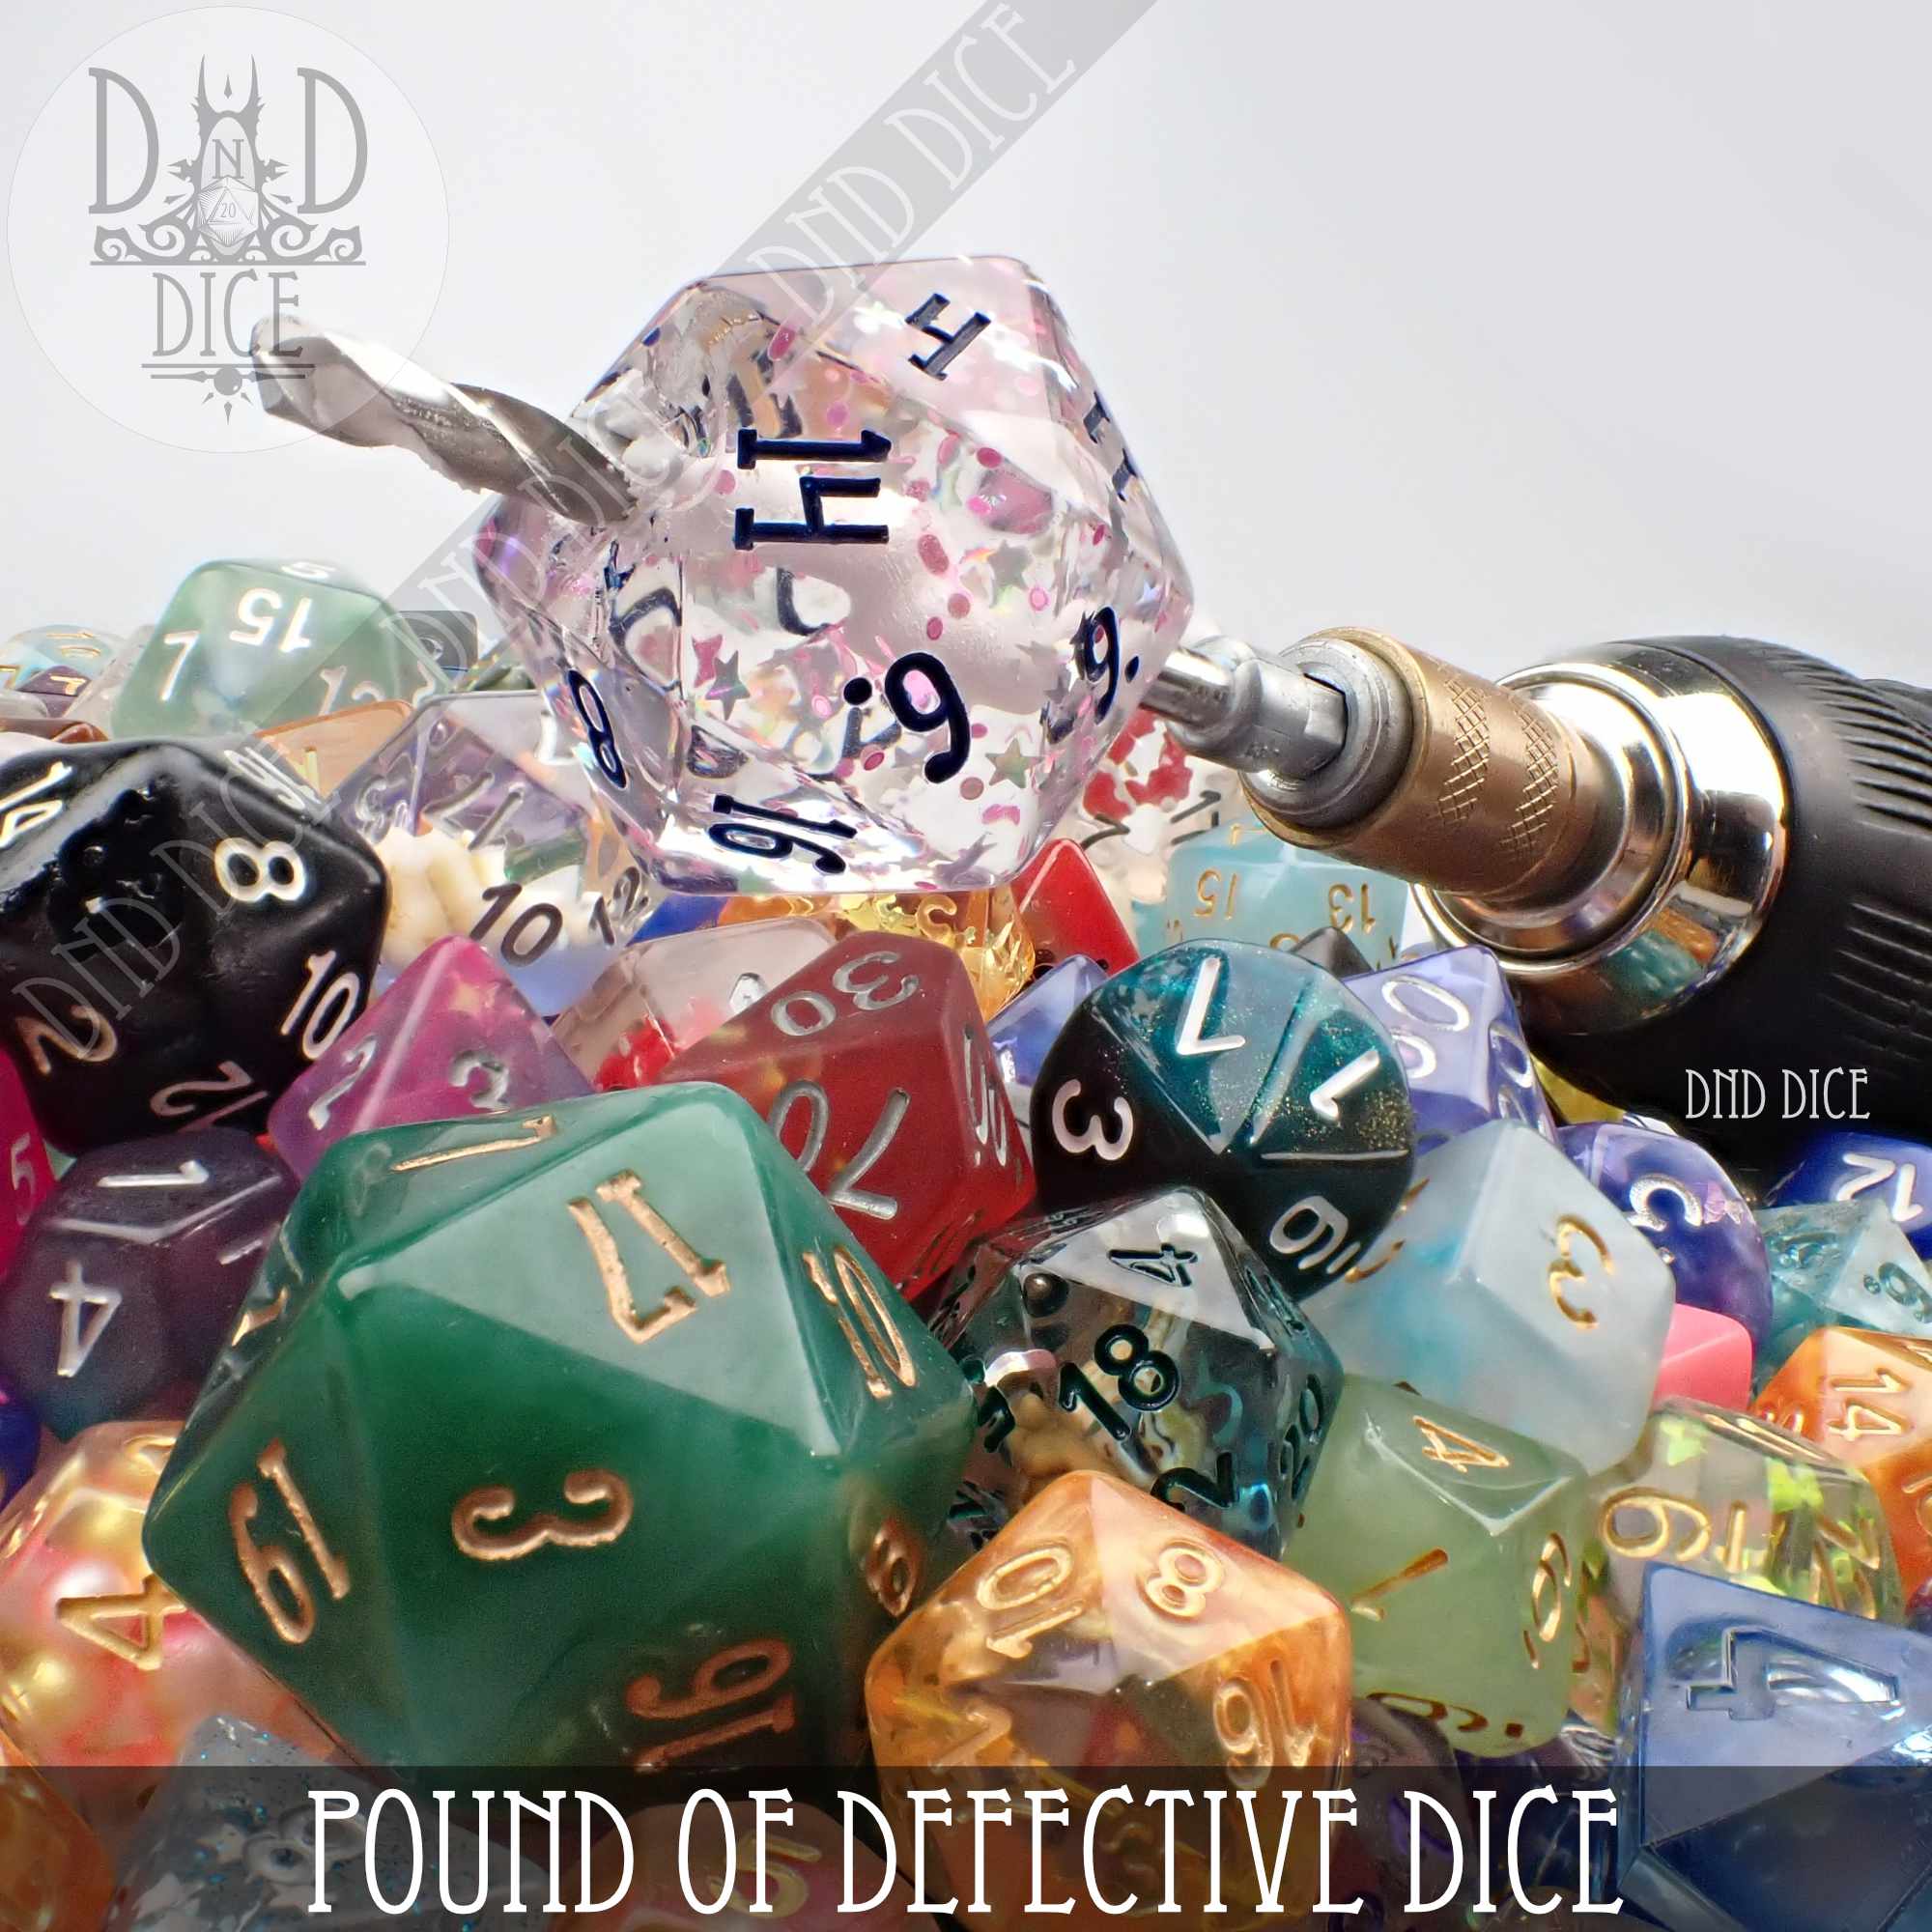 DND DICE, Huge Selection of Role Playing Dice, D&D Dice Shop